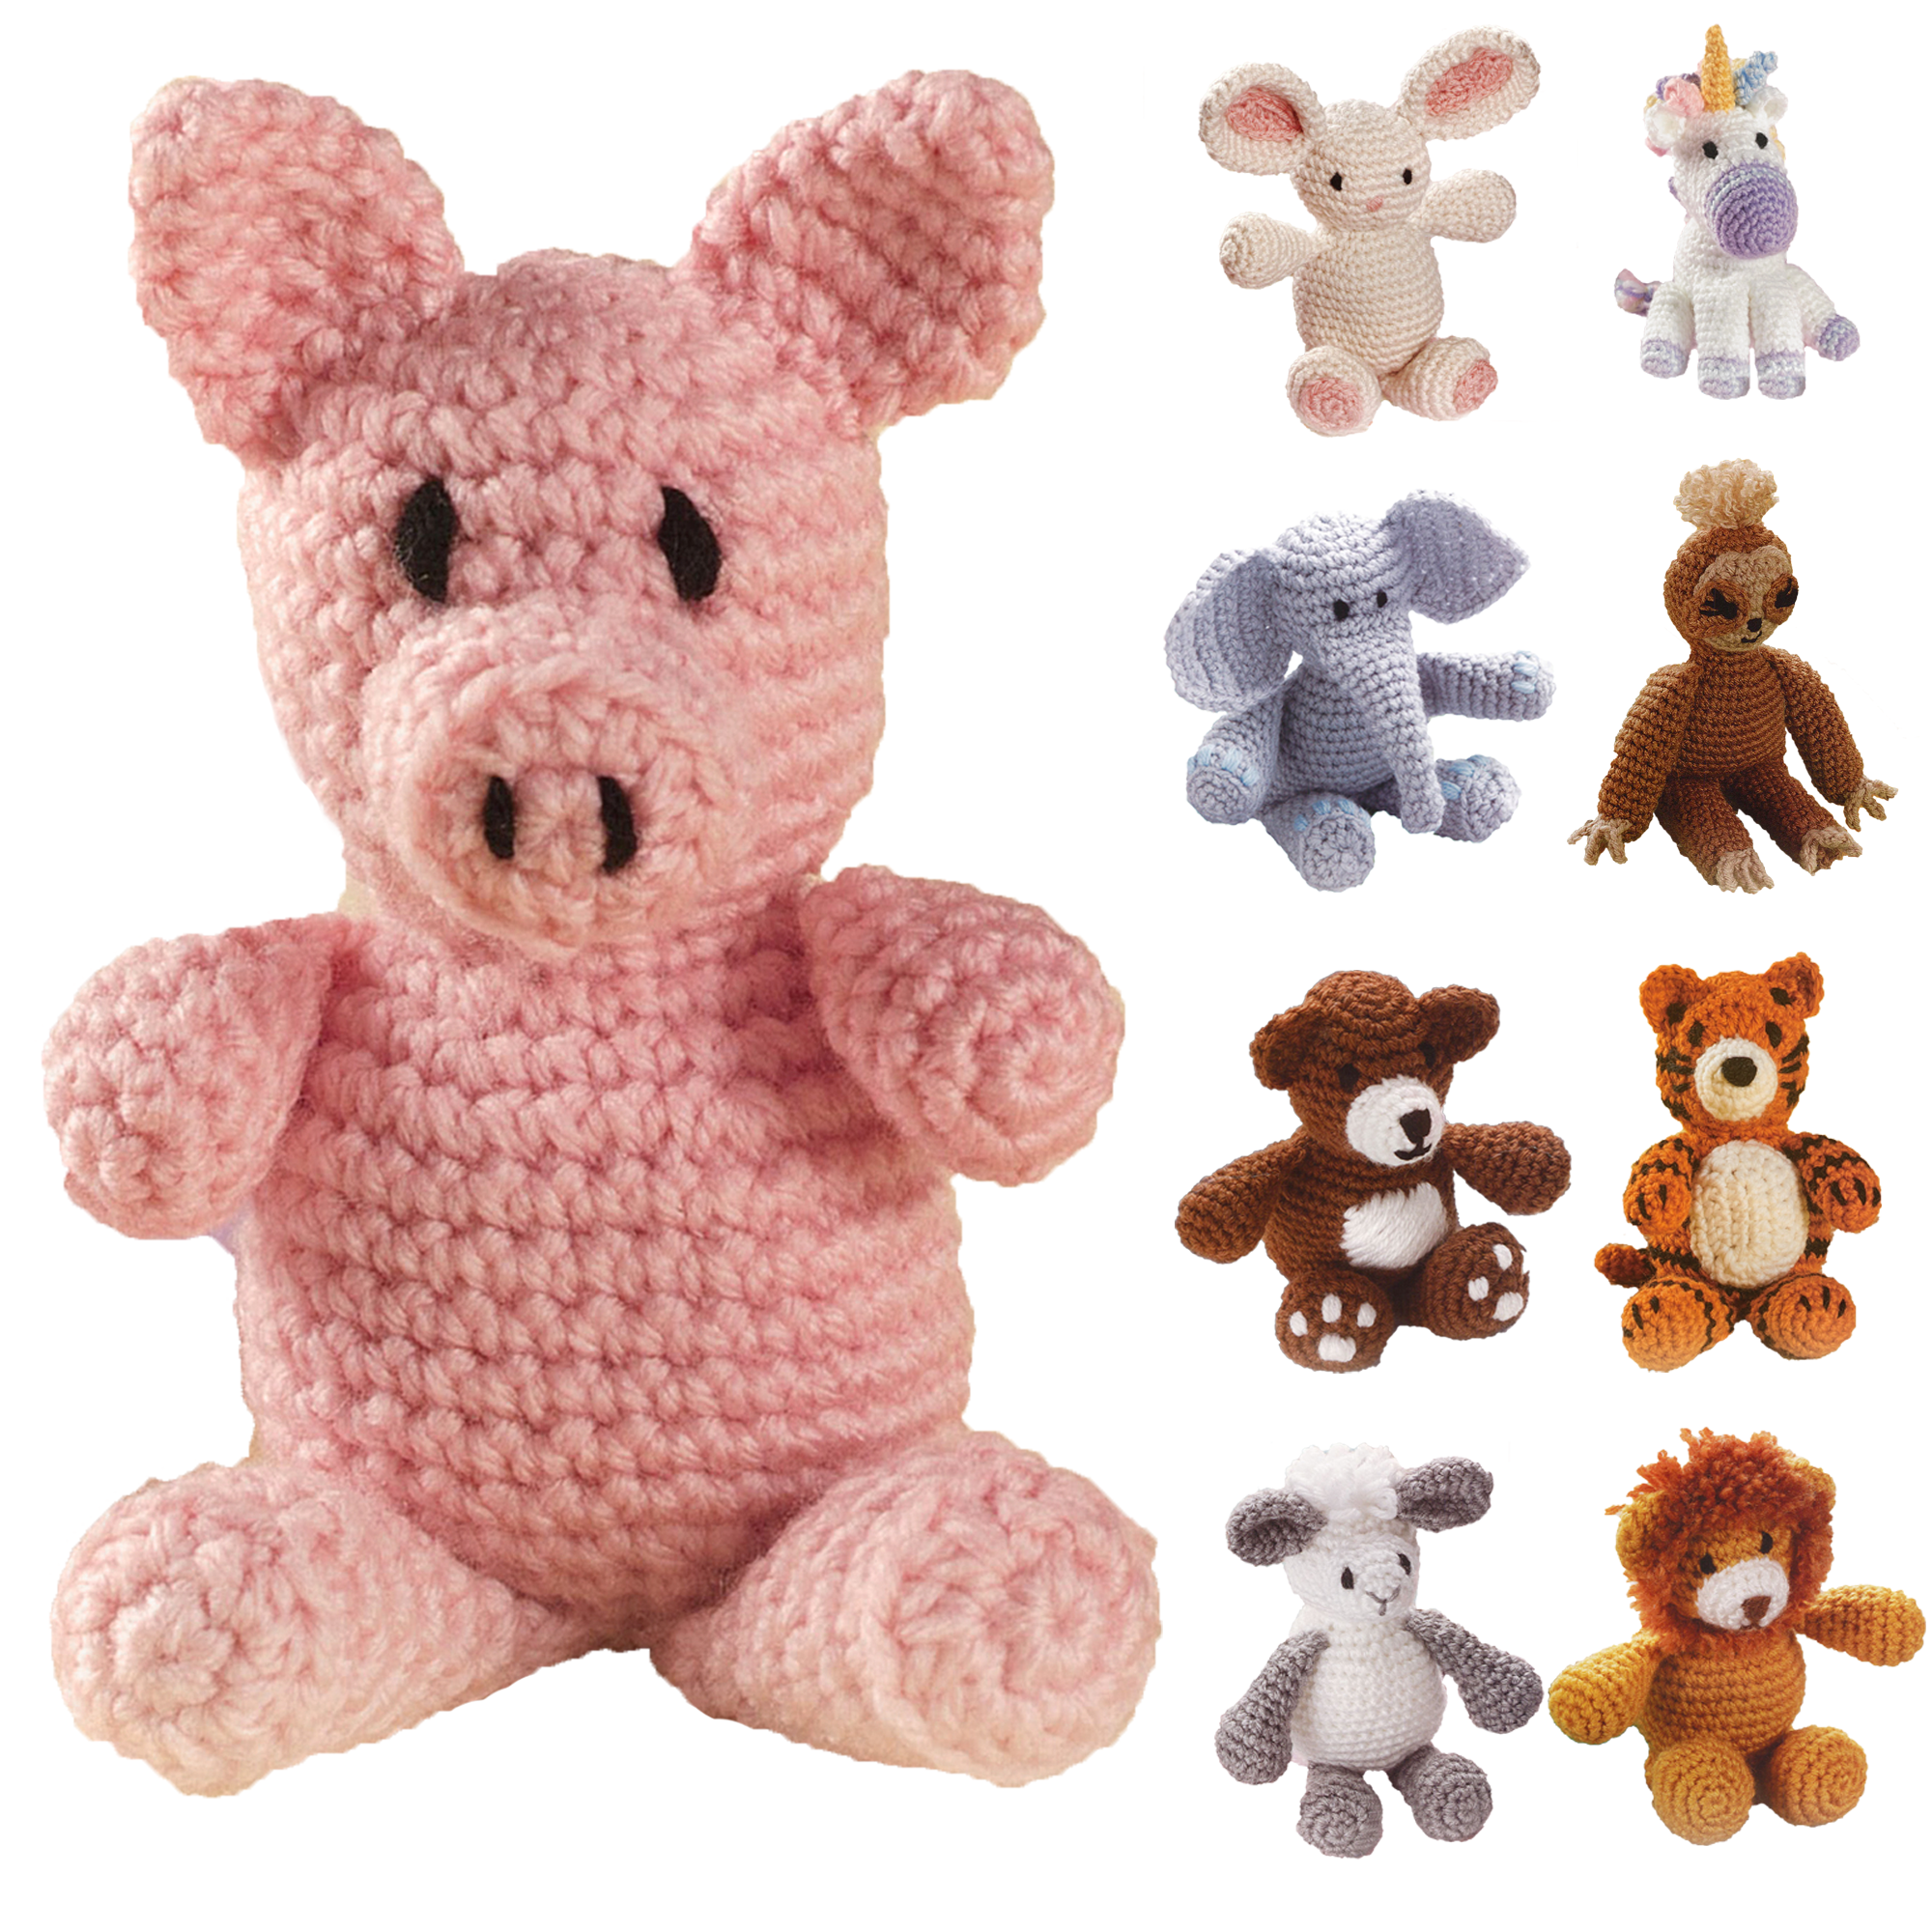 Leisure Arts Little Crochet Friend Animals Crochet Kit, Pig, 8, Complete  Crochet kit, Learn to Crochet Animal Starter kit for All Ages, Includes